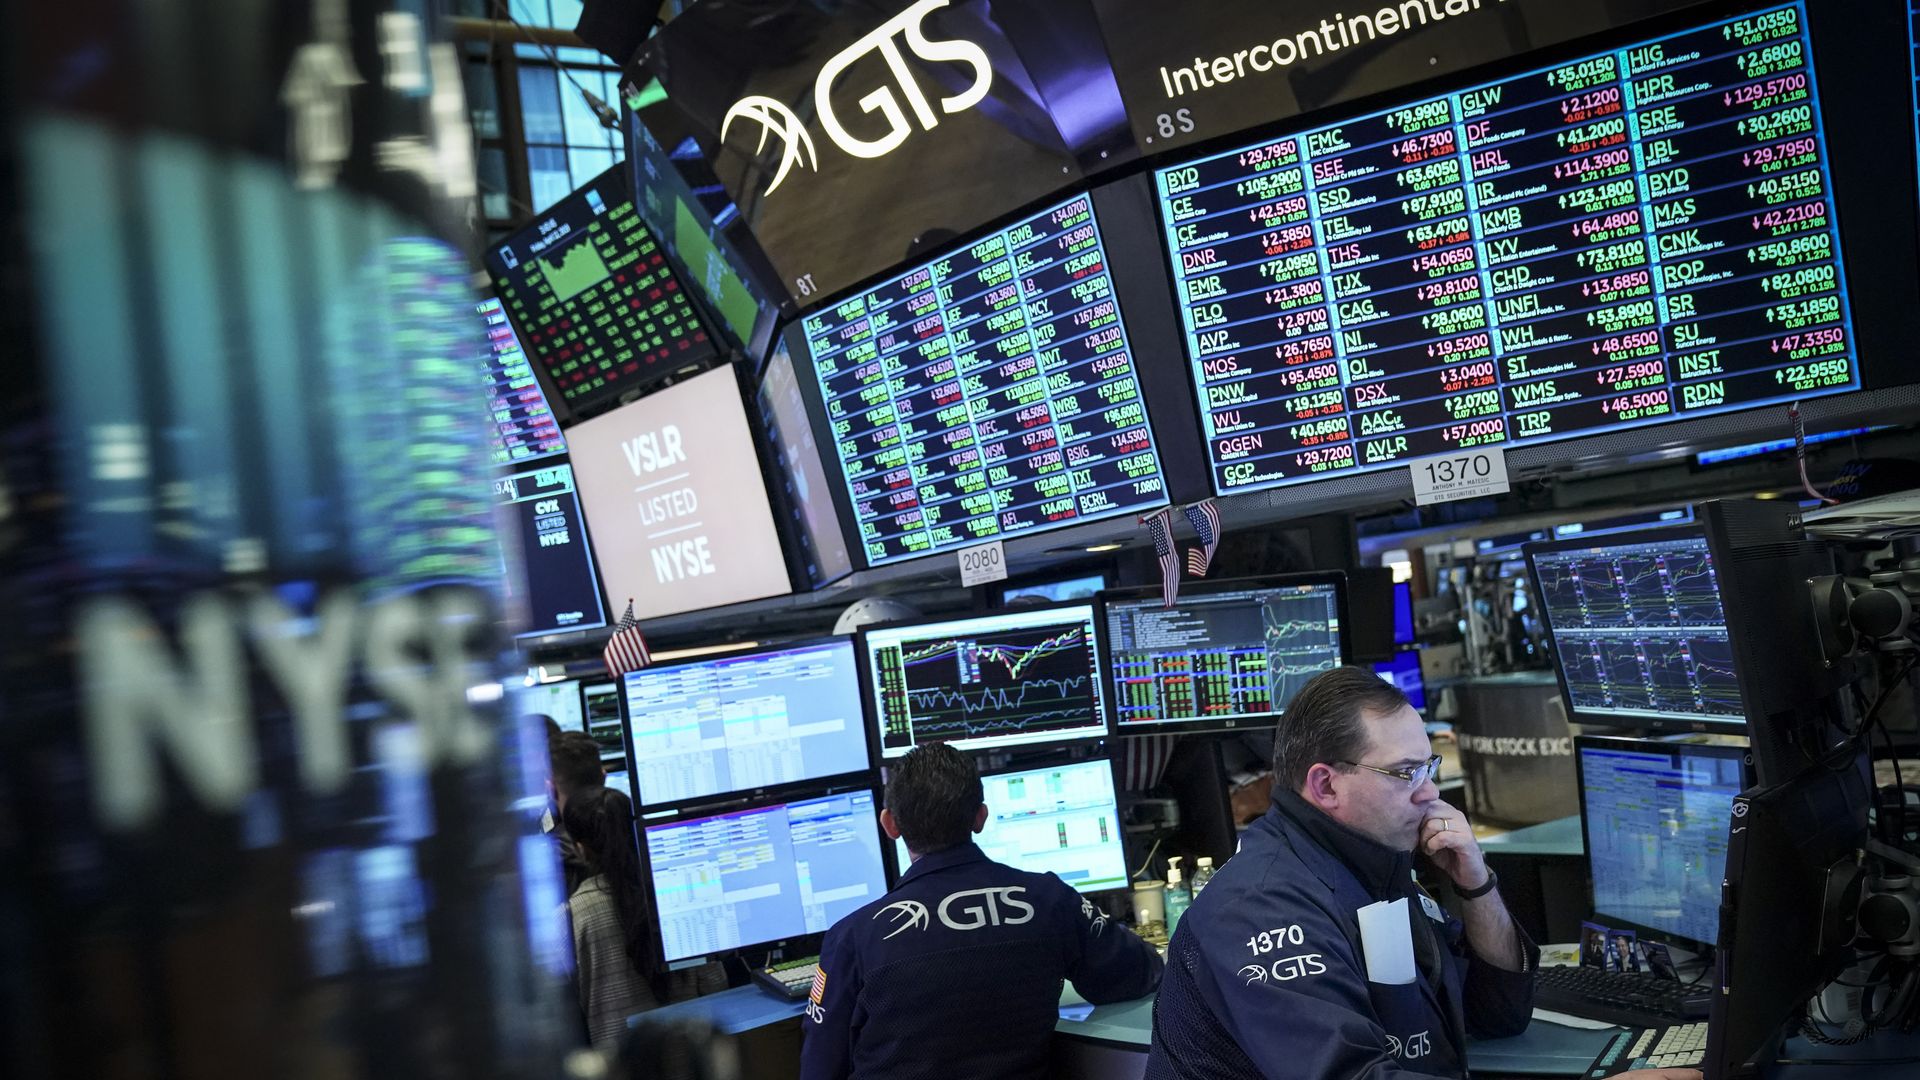 In this image, two men sit at computers underneath large trading board screens at the new york stock exchange.